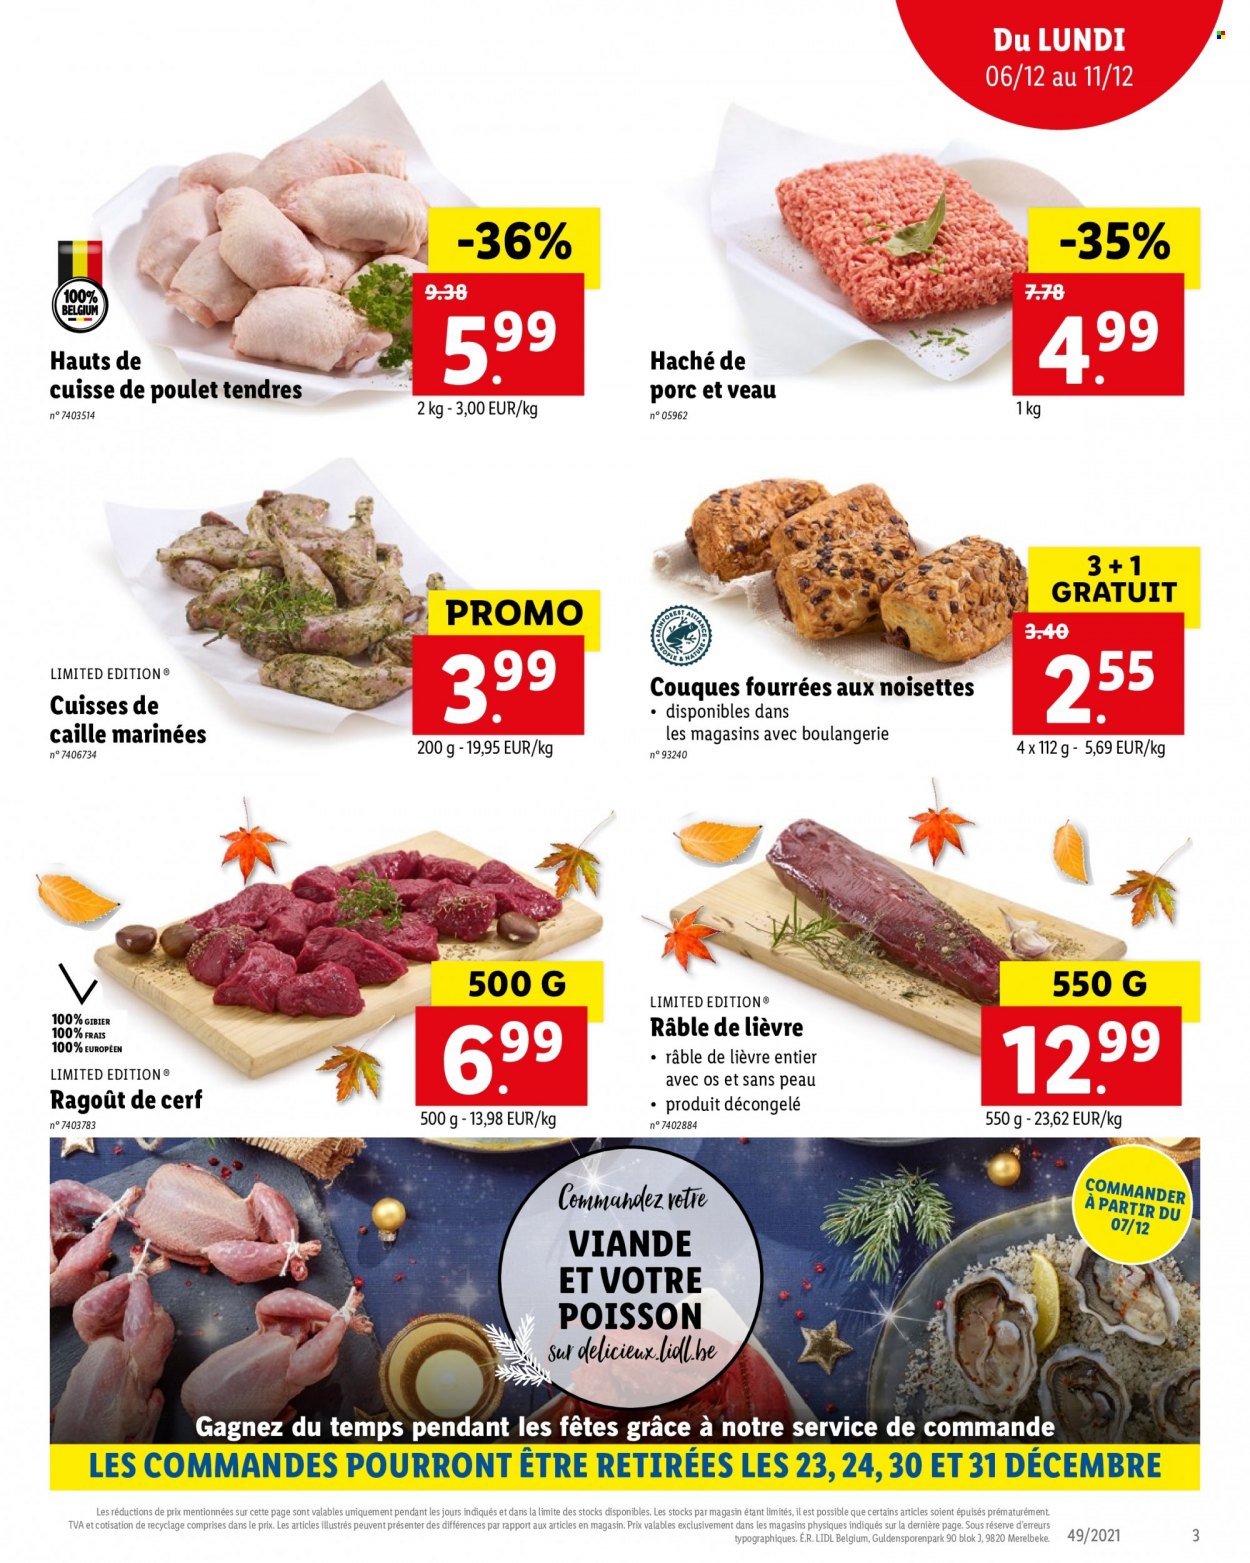 Catalogue Lidl - 6.12.2021 - 11.12.2021. Page 3.